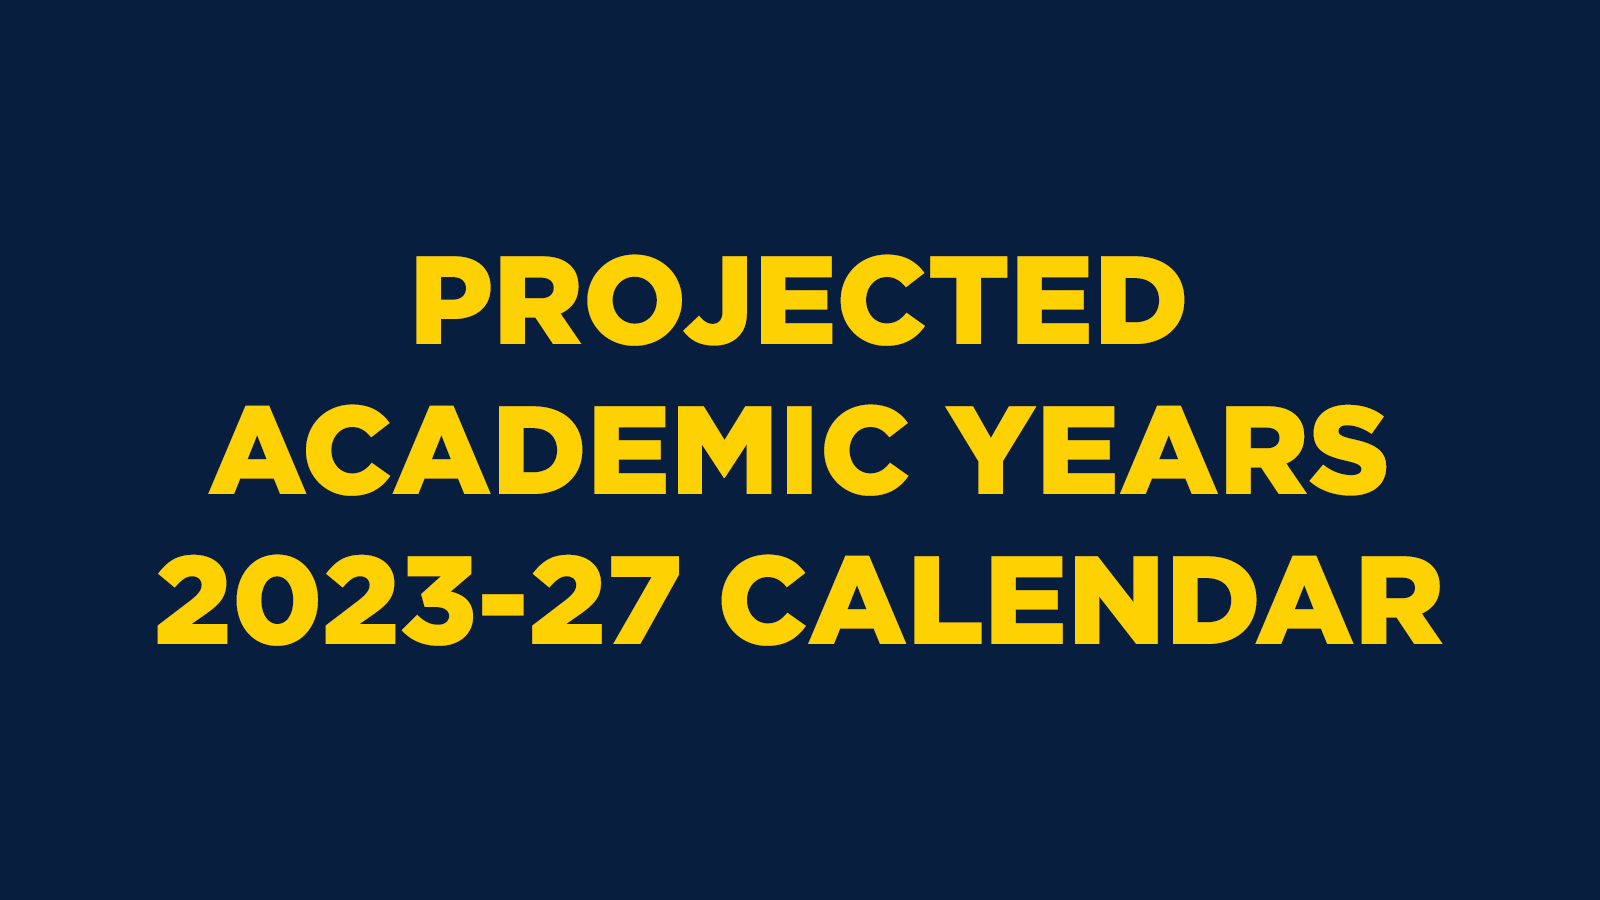 Projected Academic Years 2023-27 Calendar